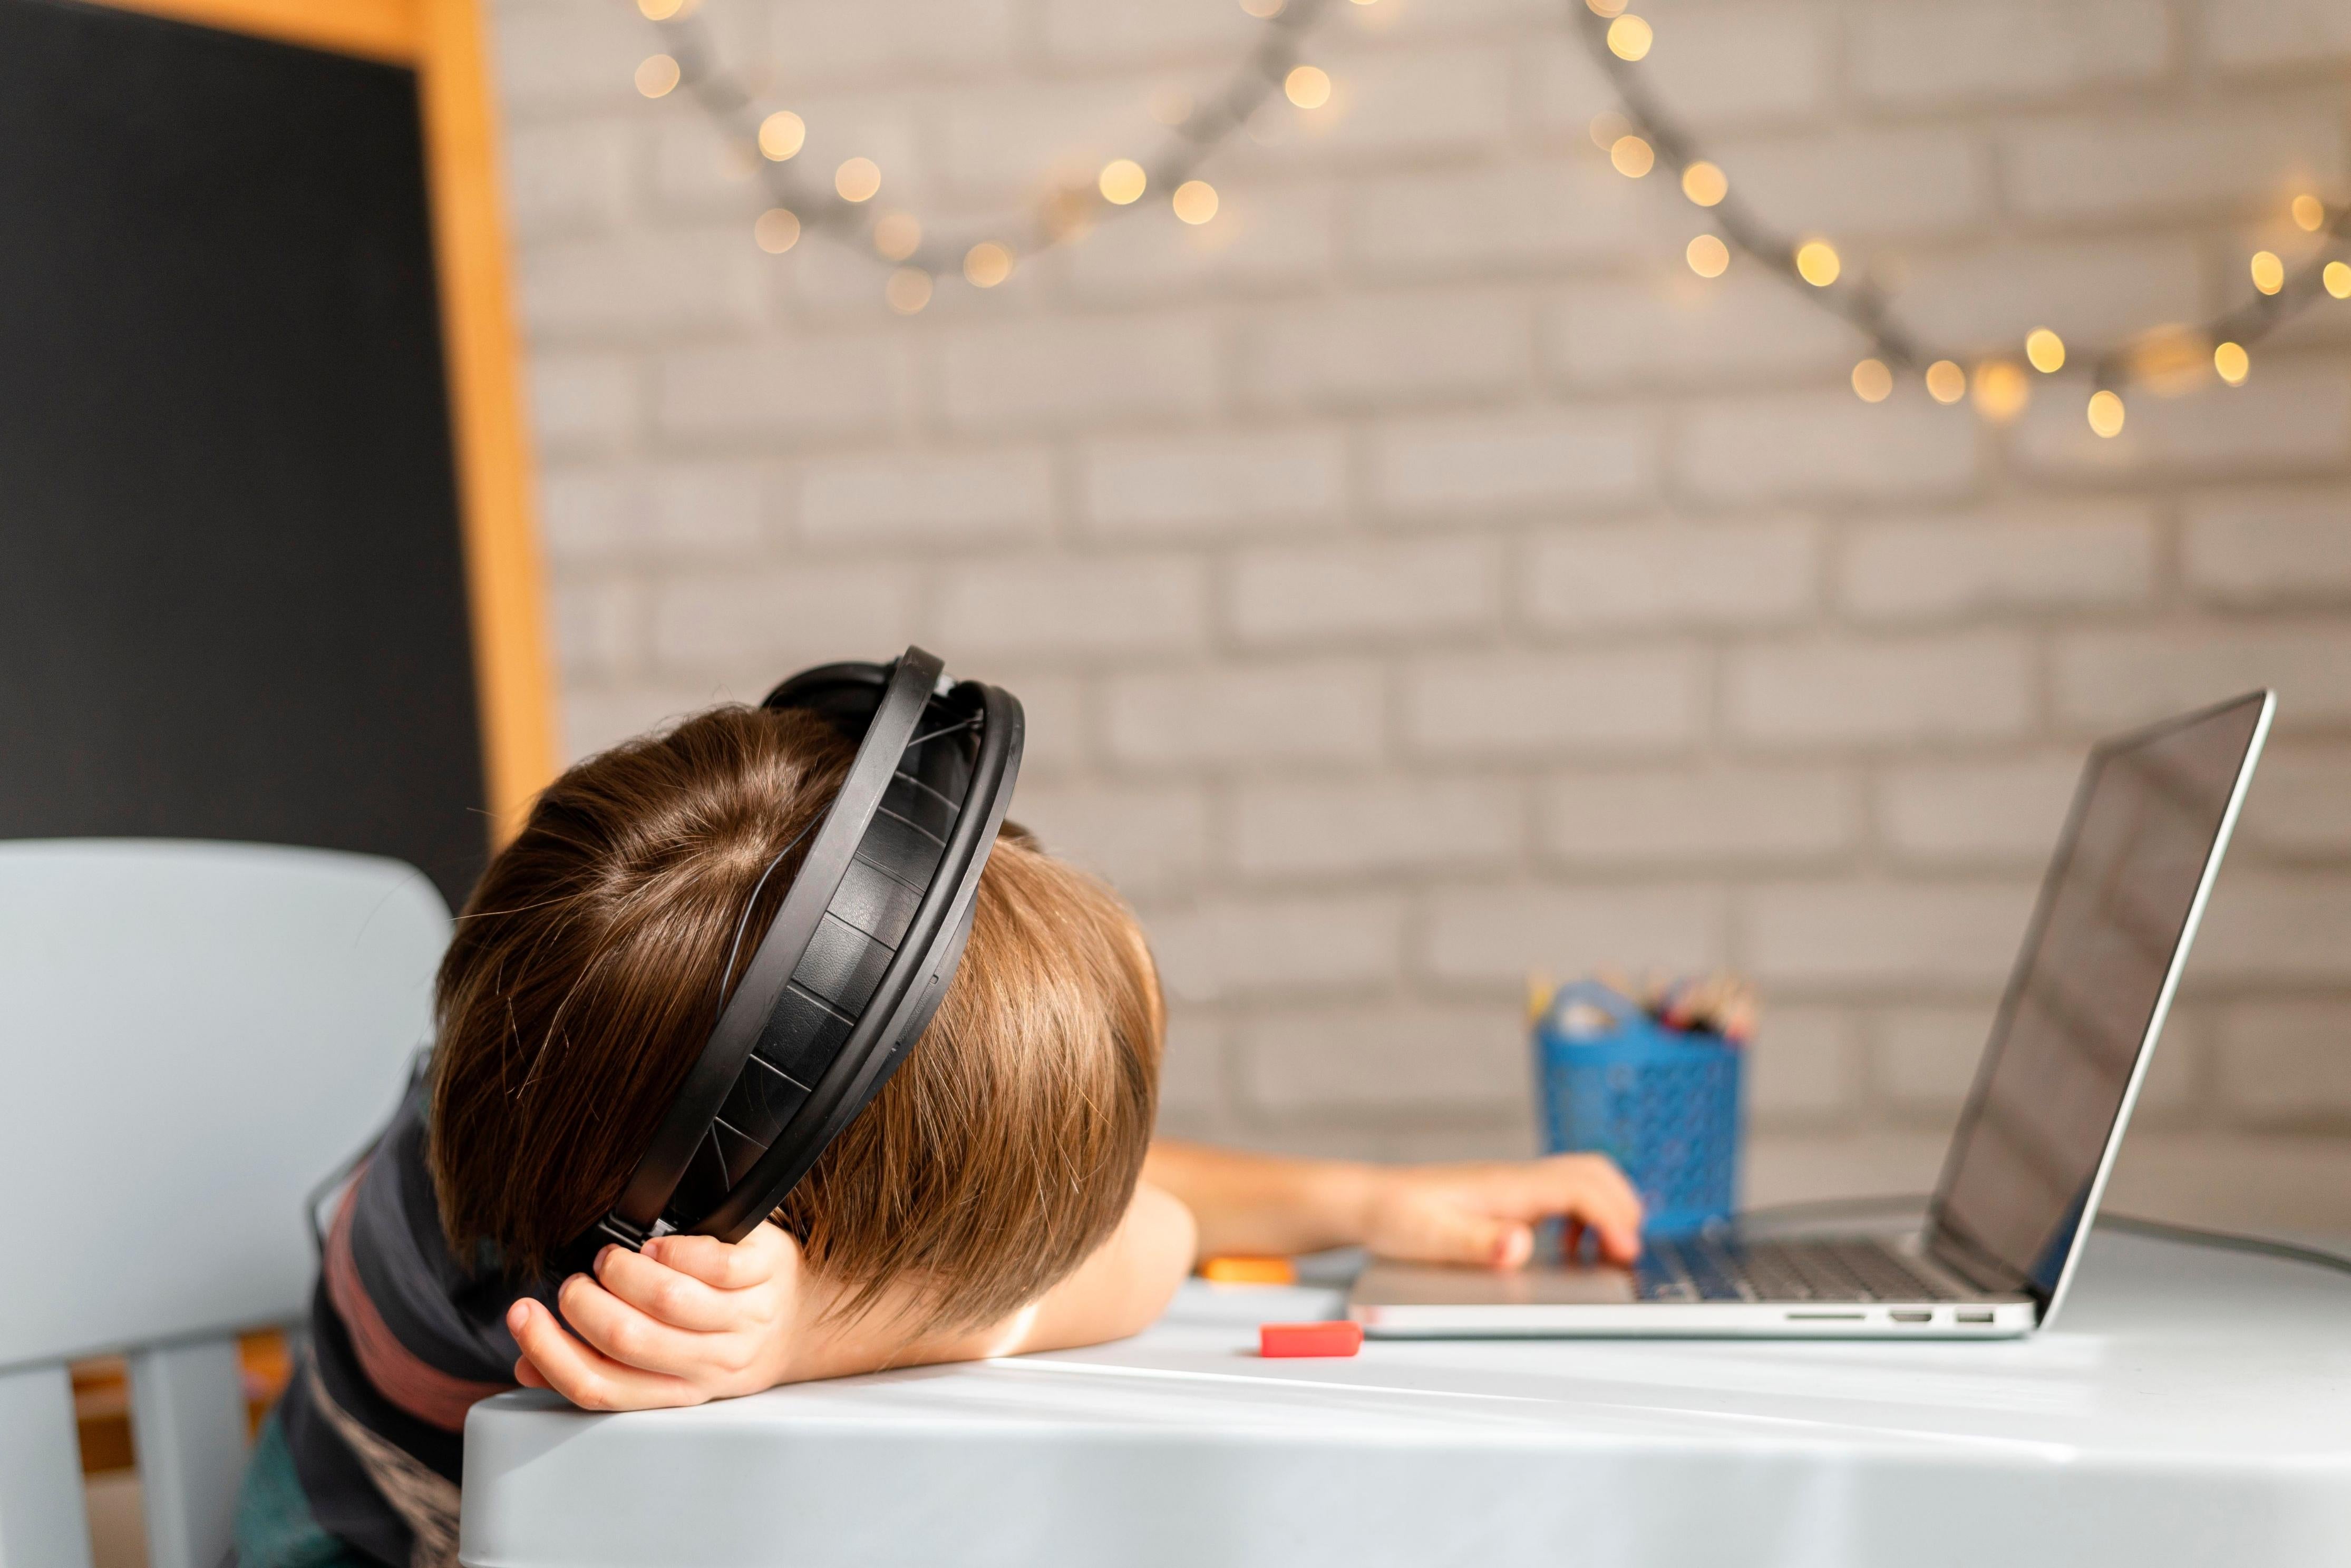 Boy with headphones resting his head on desk while using laptop